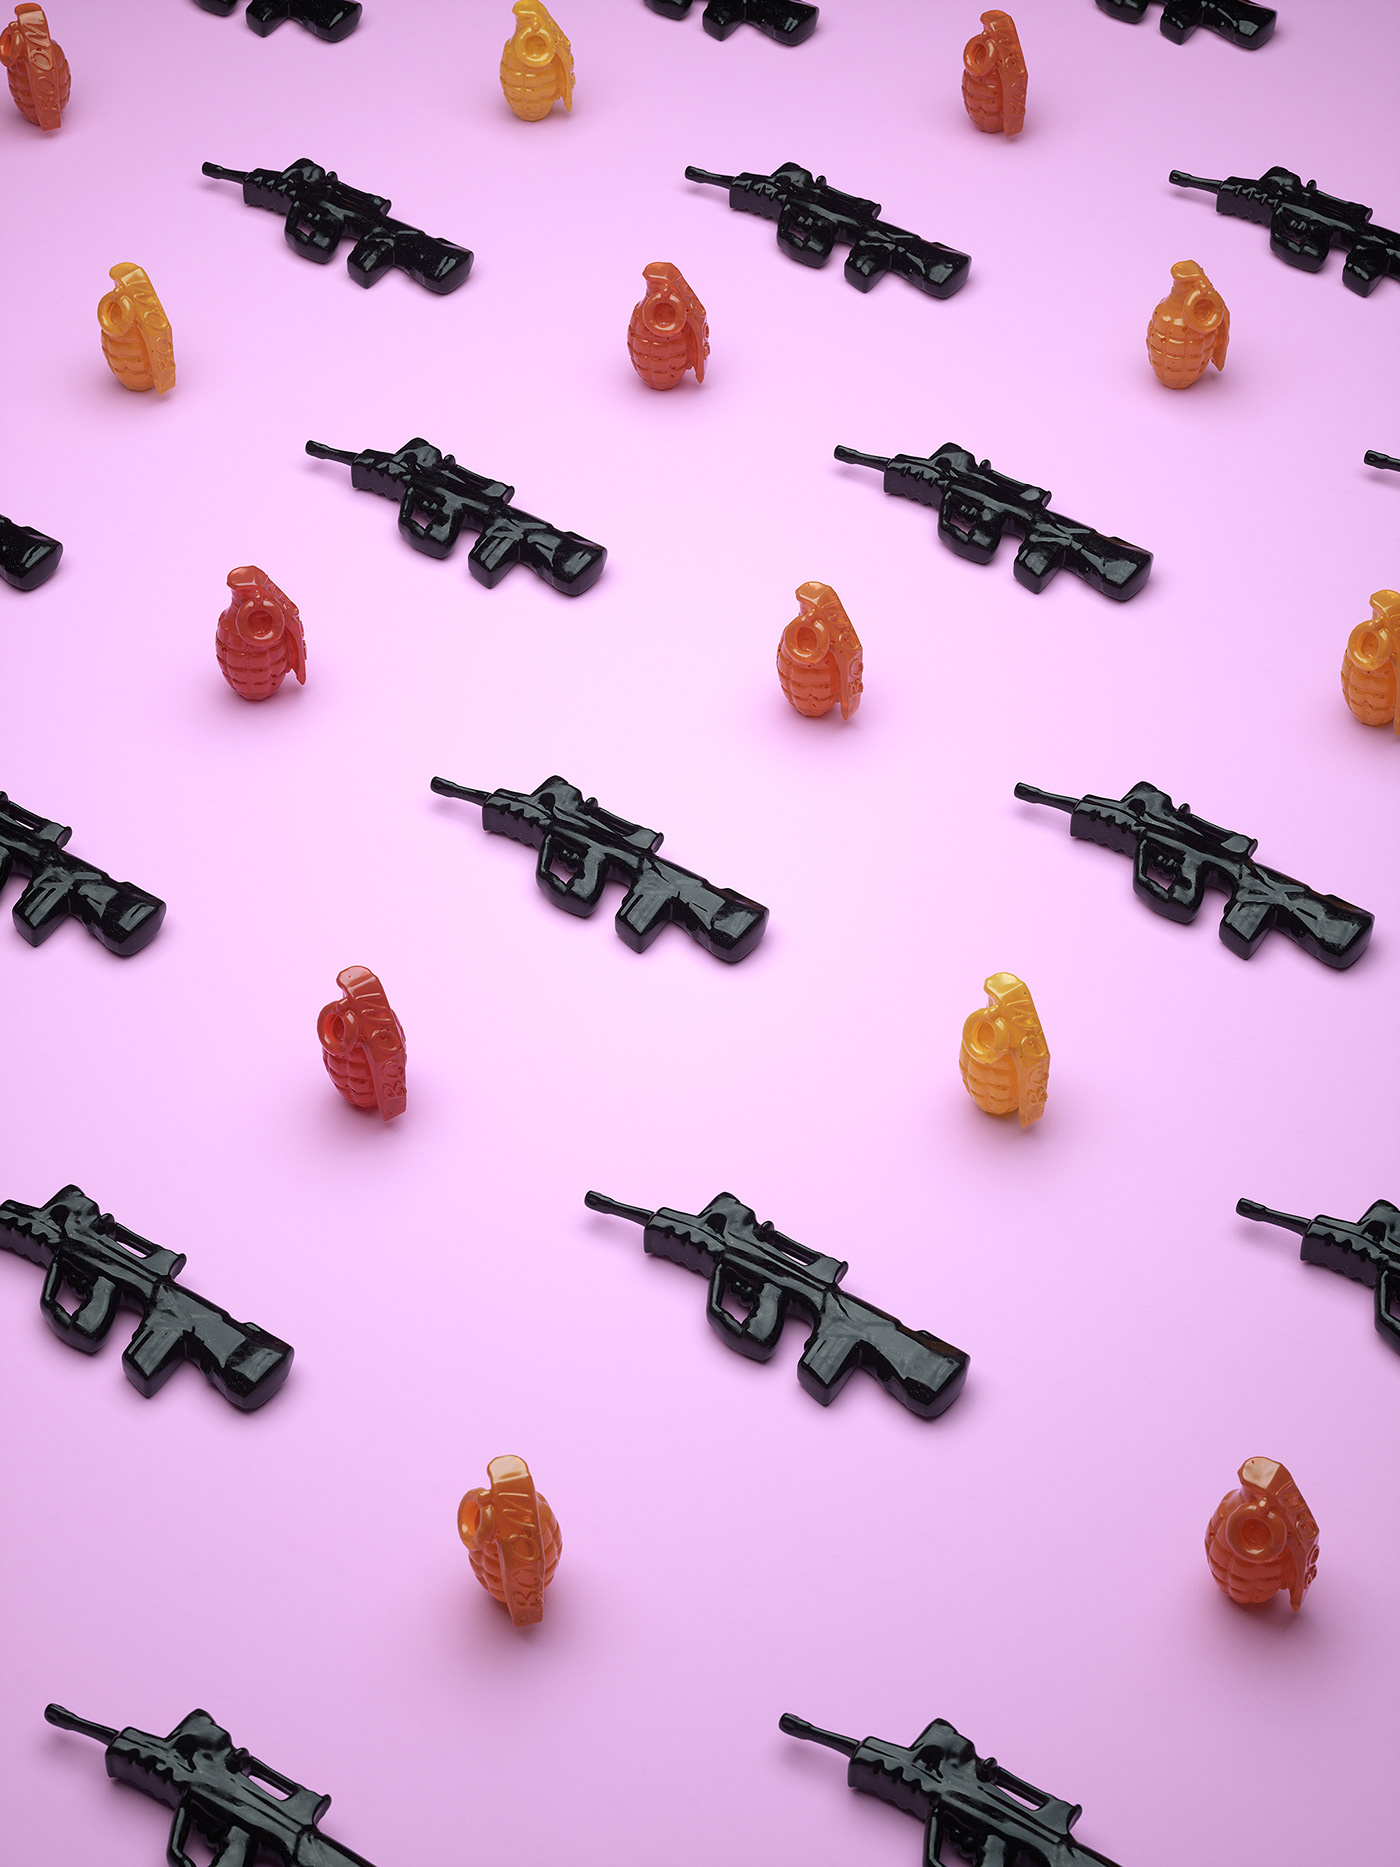 Candy War Candies weapons sugar #interaction #motion #graphicDesign #illustration #photography #DigitalArt